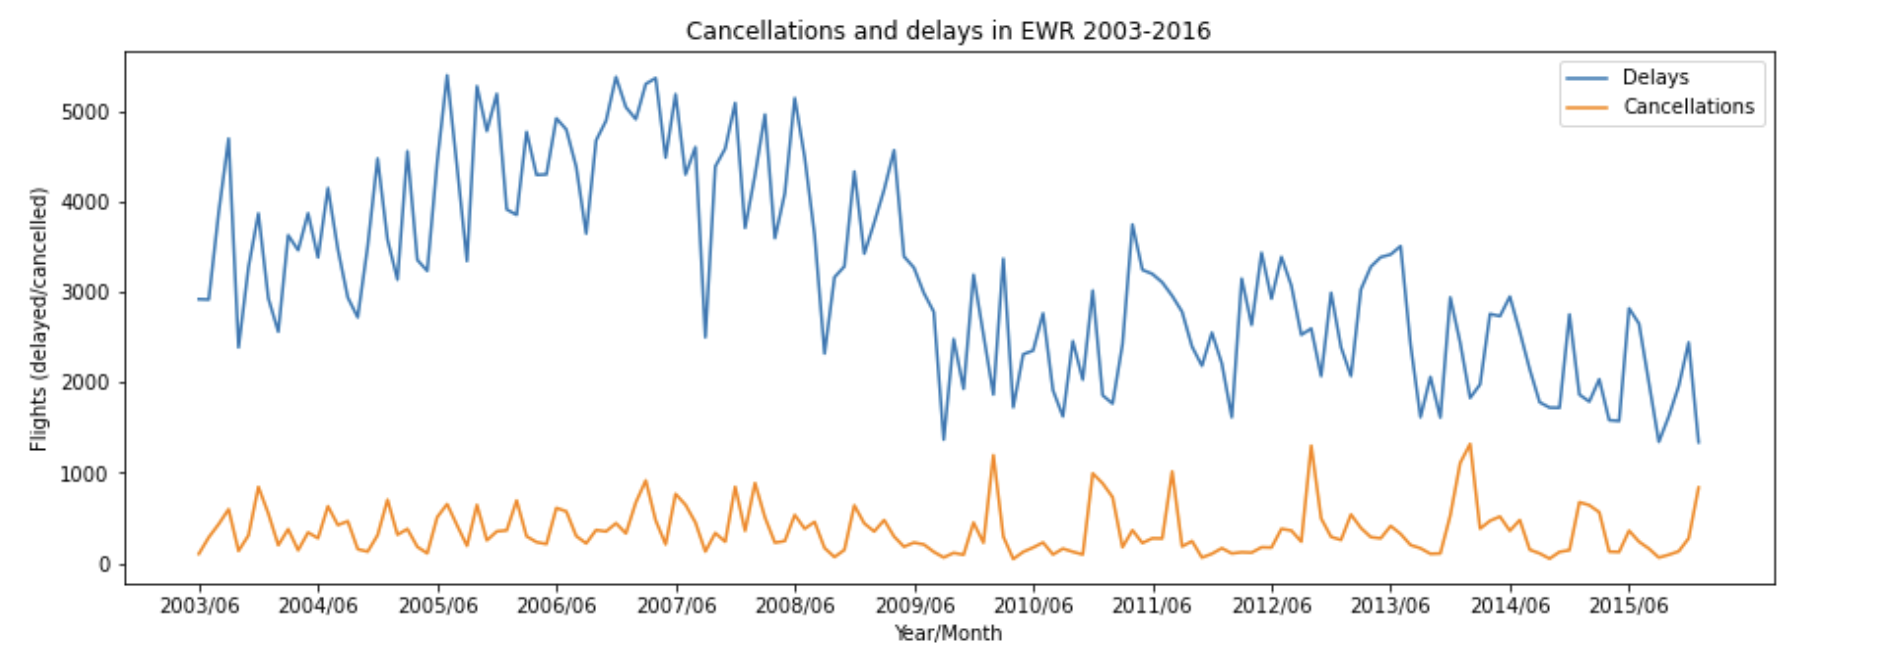 The line chart of delays and cancellations in EWR